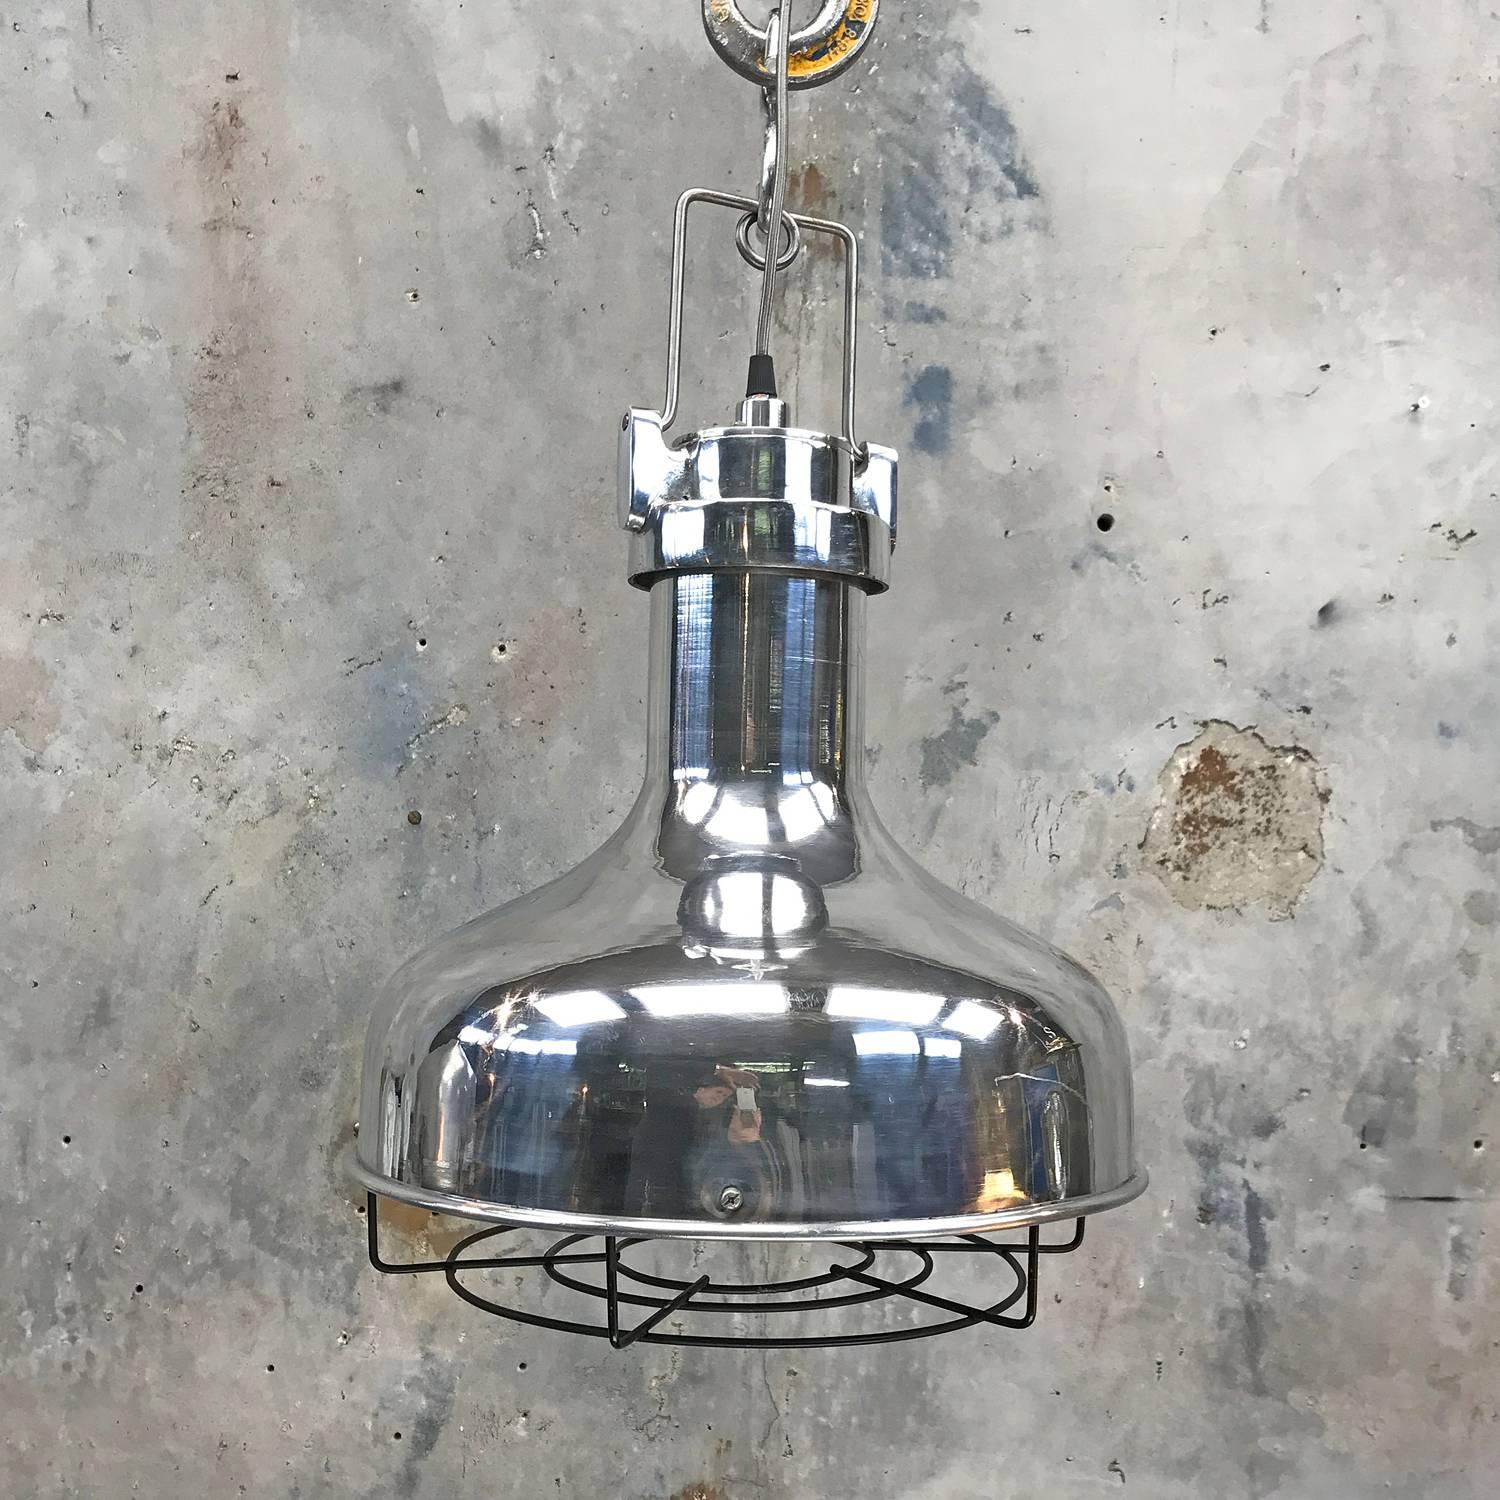 Aluminium Engine room pendant.

Originally found in the engine rooms of large sea going vessels such as supertankers and cargo ships built during the 1970s.

Spun aluminium dome with cast aluminium top, black steel cage and silver braided